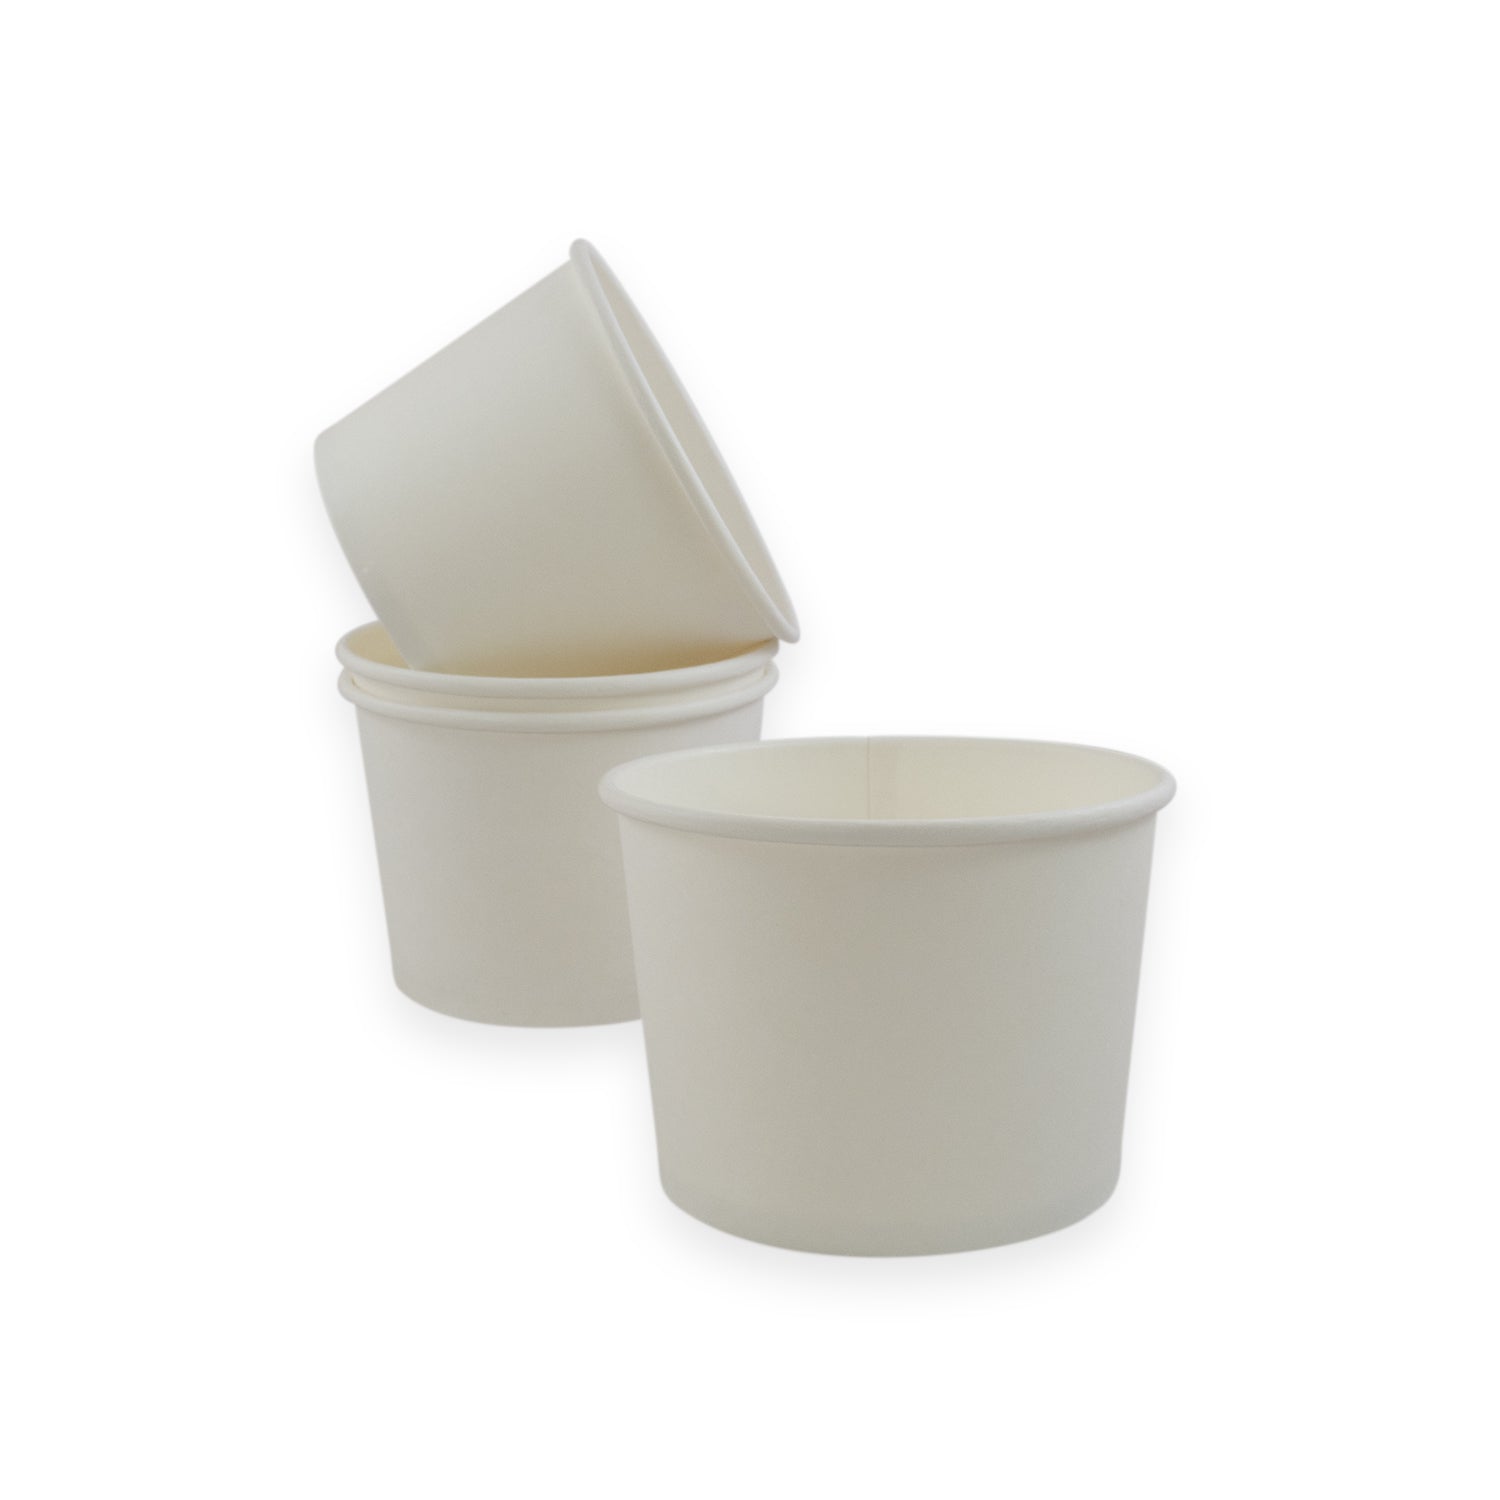 Sustain Sustain Paper Round Bowl/Container White 16oz 115mm White - CT/500 Disposable Food Packaging  